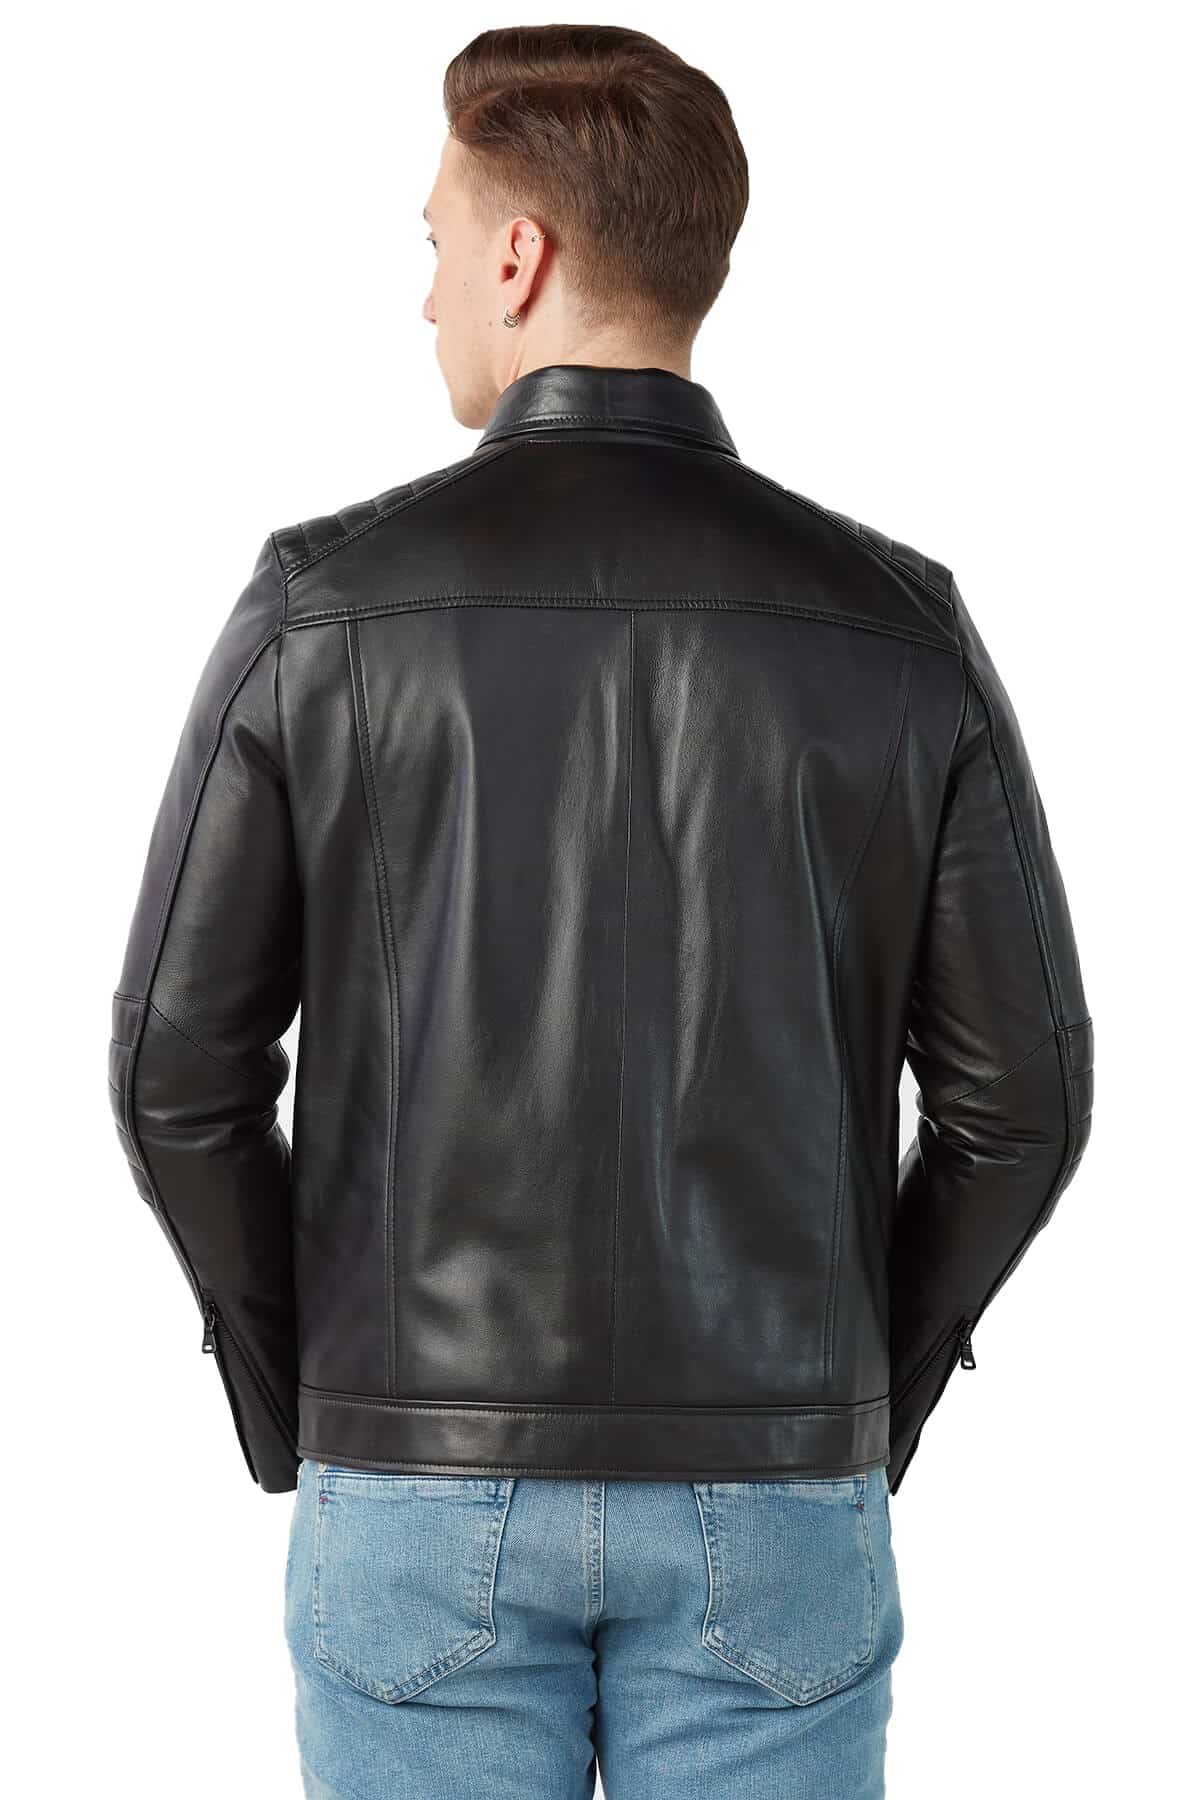 Carlo Men's 100 % Real Black Leather Jacket